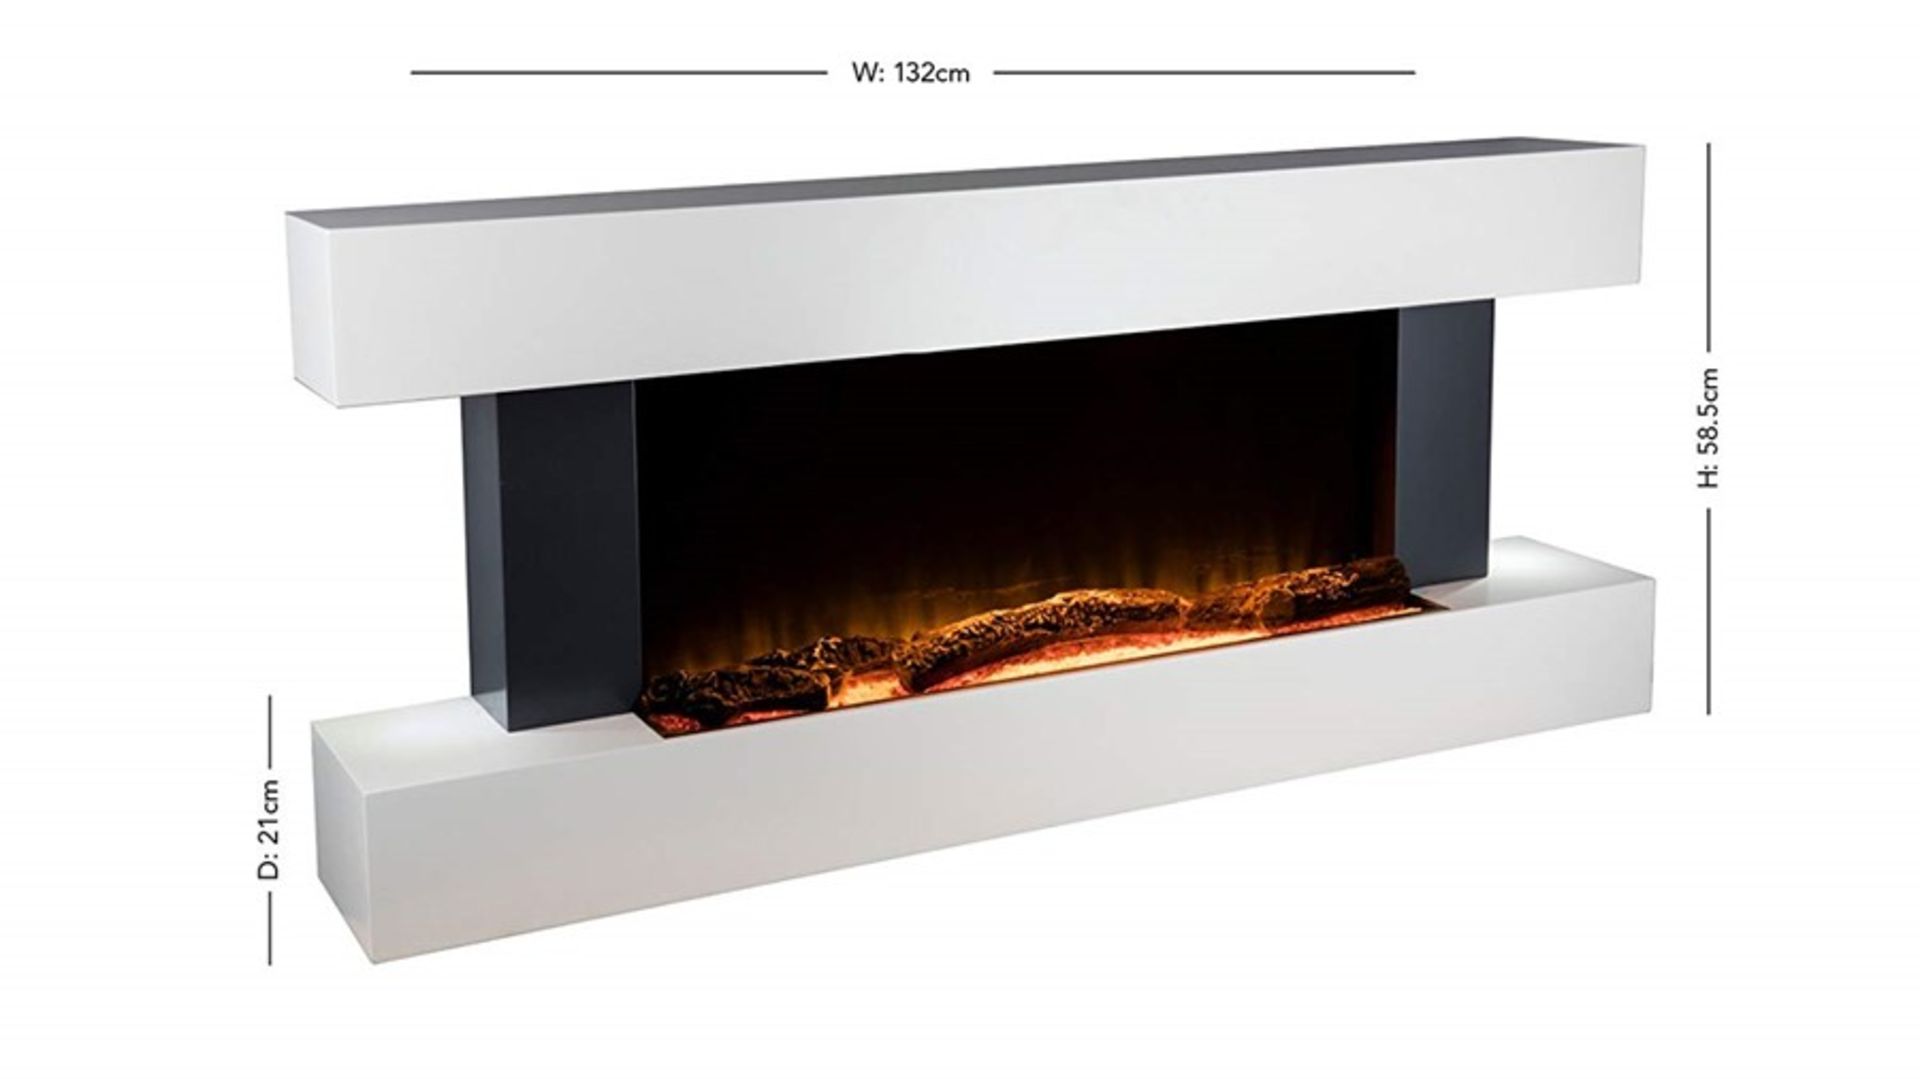 2000w Wall Mounted surround electric fire place suite with LED flame effect, new and boxed, features - Image 2 of 6